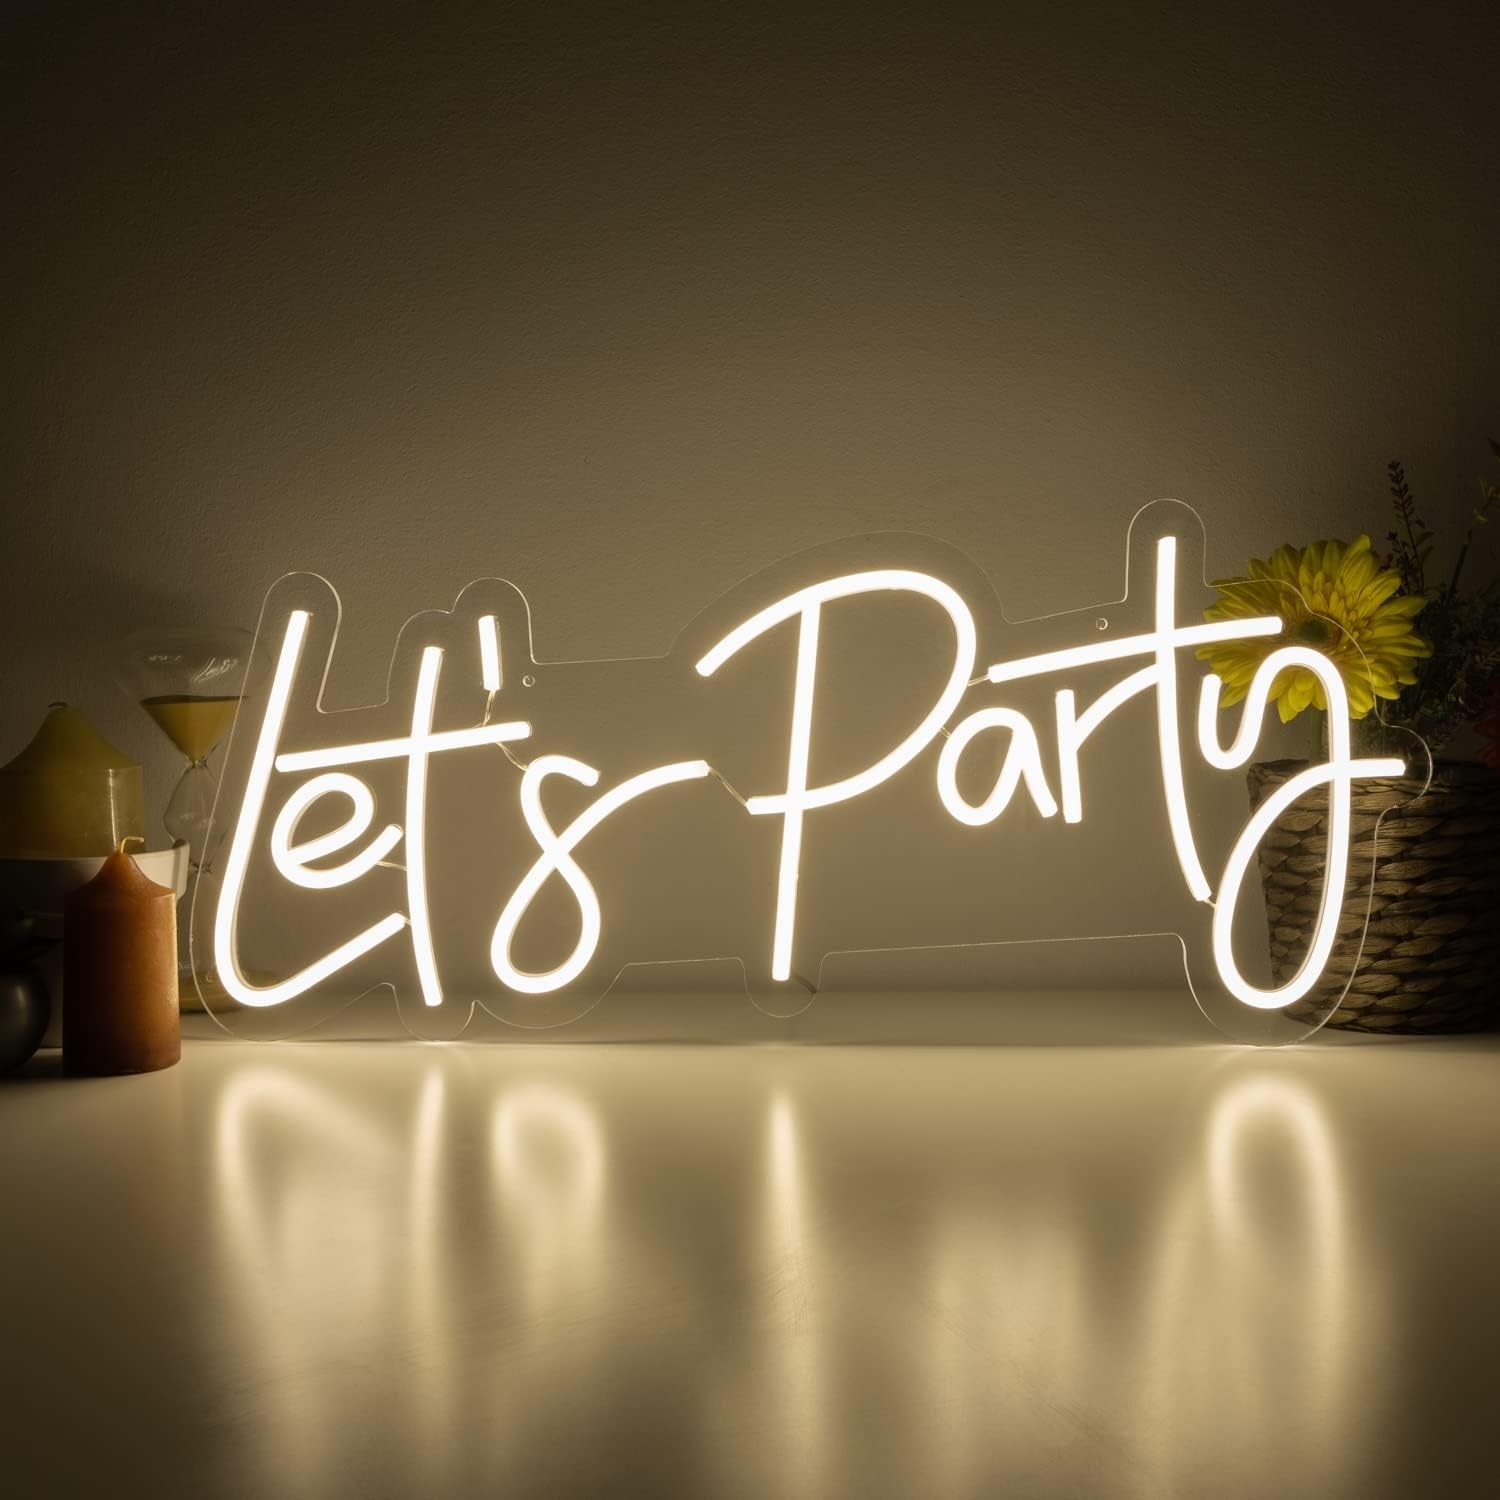 Lets party - illuminated LED neon sign hanging on the wall